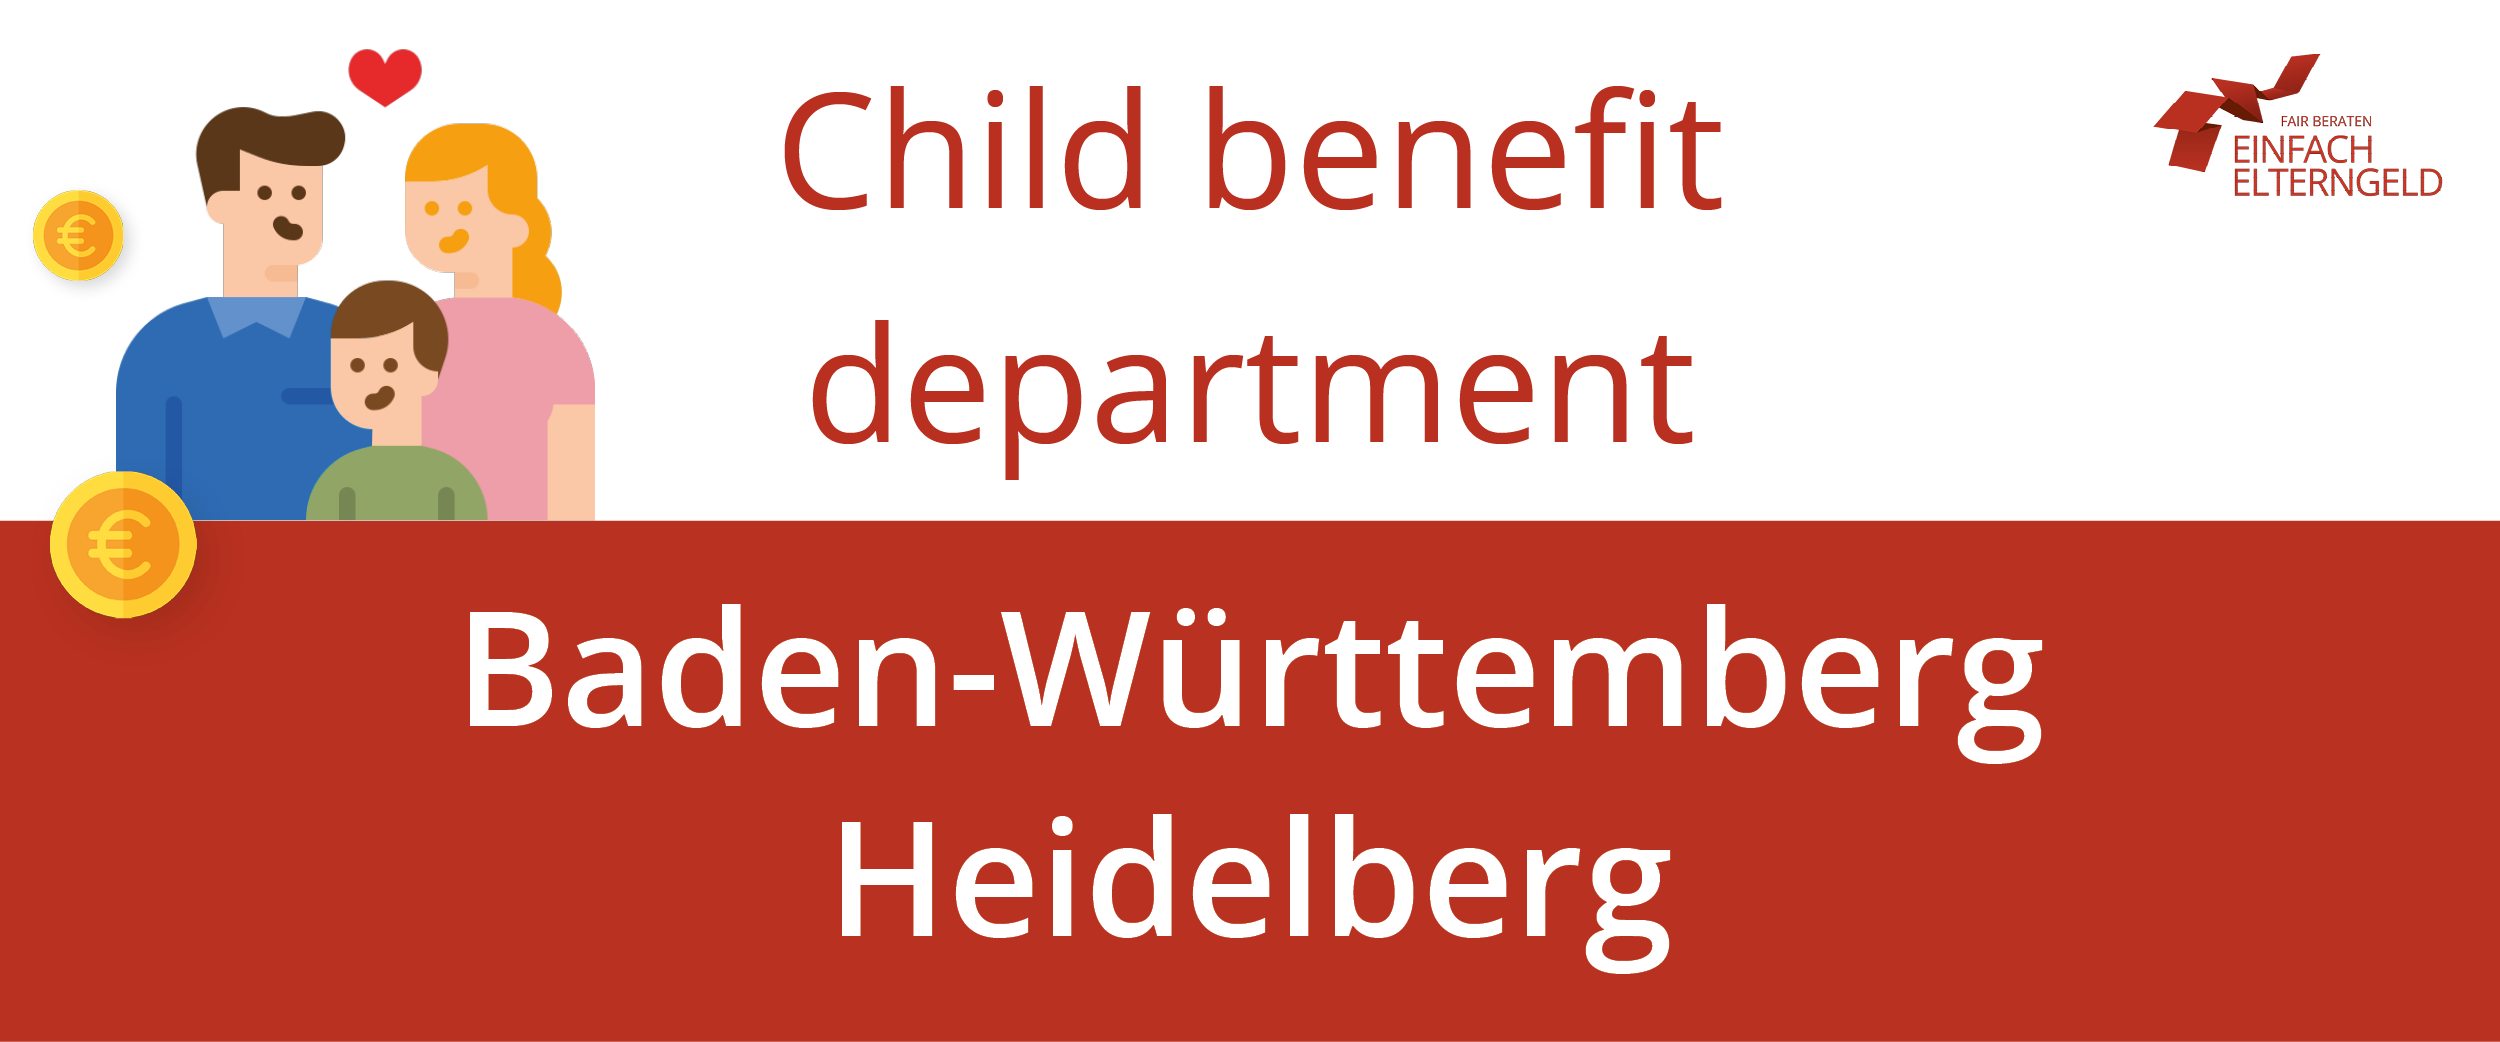 We present to you the Child benefit department Baden-Württemberg Heidelberg.